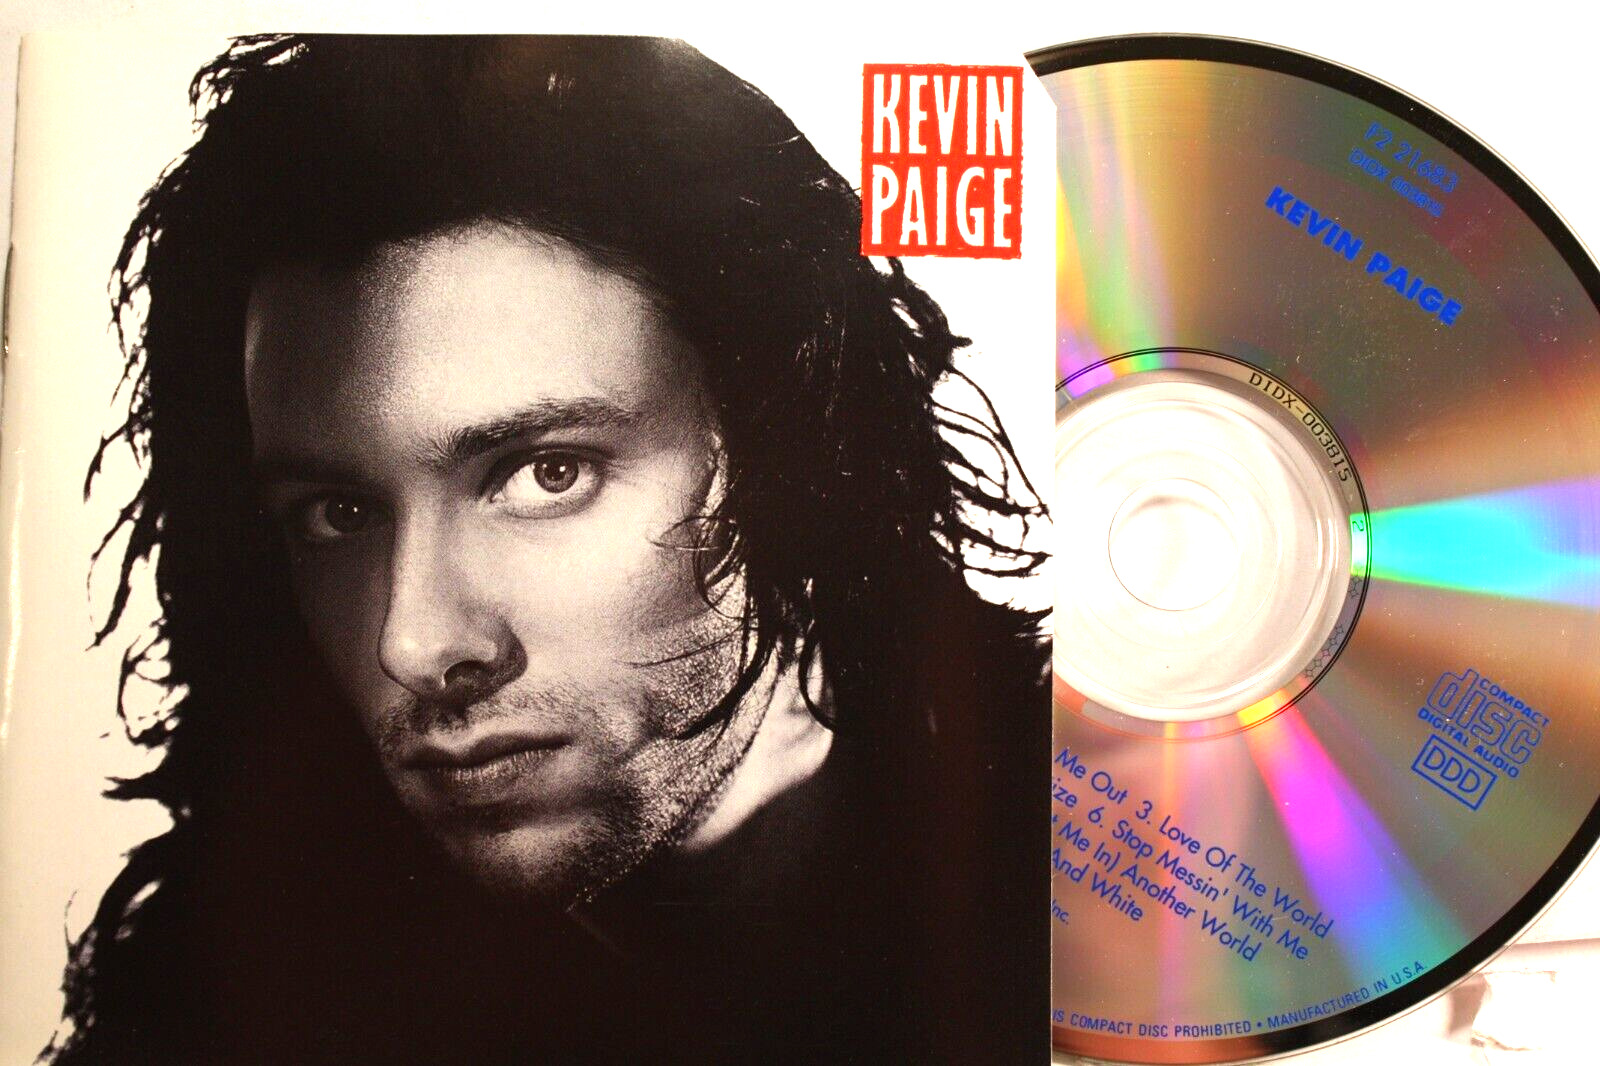 "KEVIN PAGE" by KEVIN PAGE (CD 1989 Chrysalis) Dance/Pop/Rock VG & Ships Free